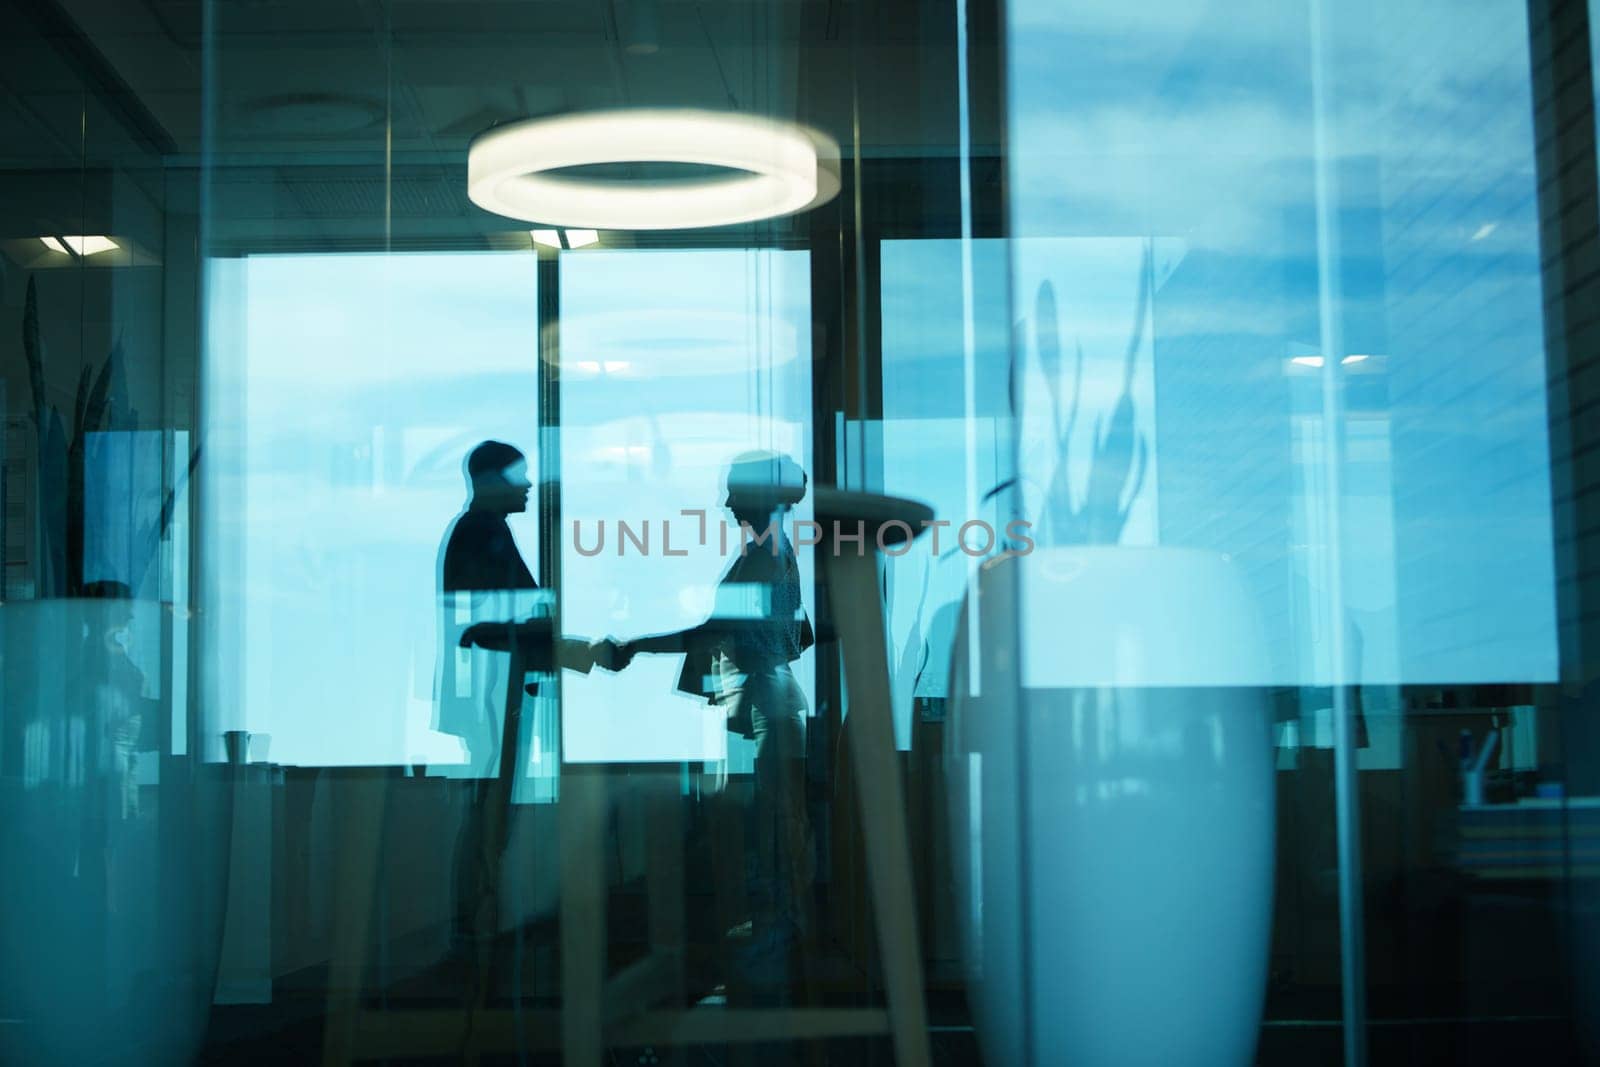 Weve got ourselves a deal. Silhouetted shot of two businesspeople shaking hands in an office